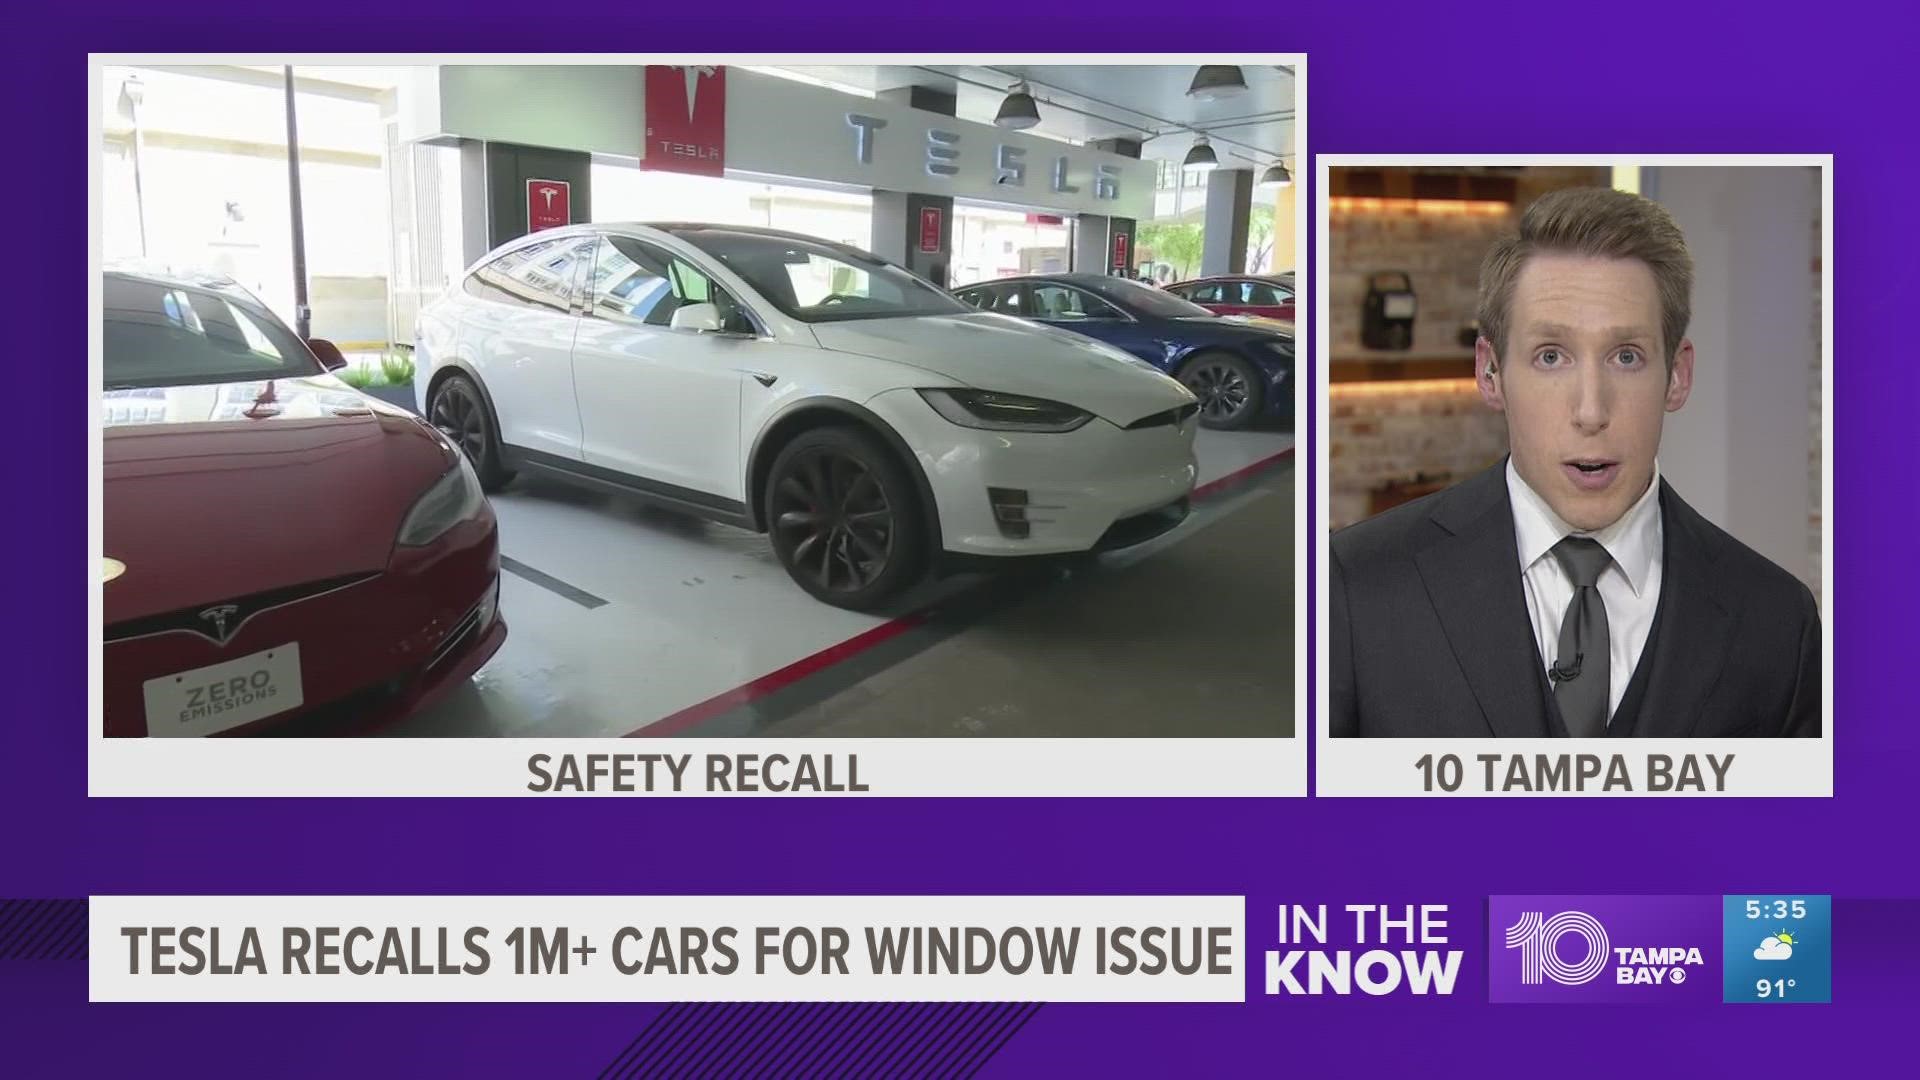 Tesla said it discovered the problem, which impacts more than 1 million vehicles, during production testing in August.